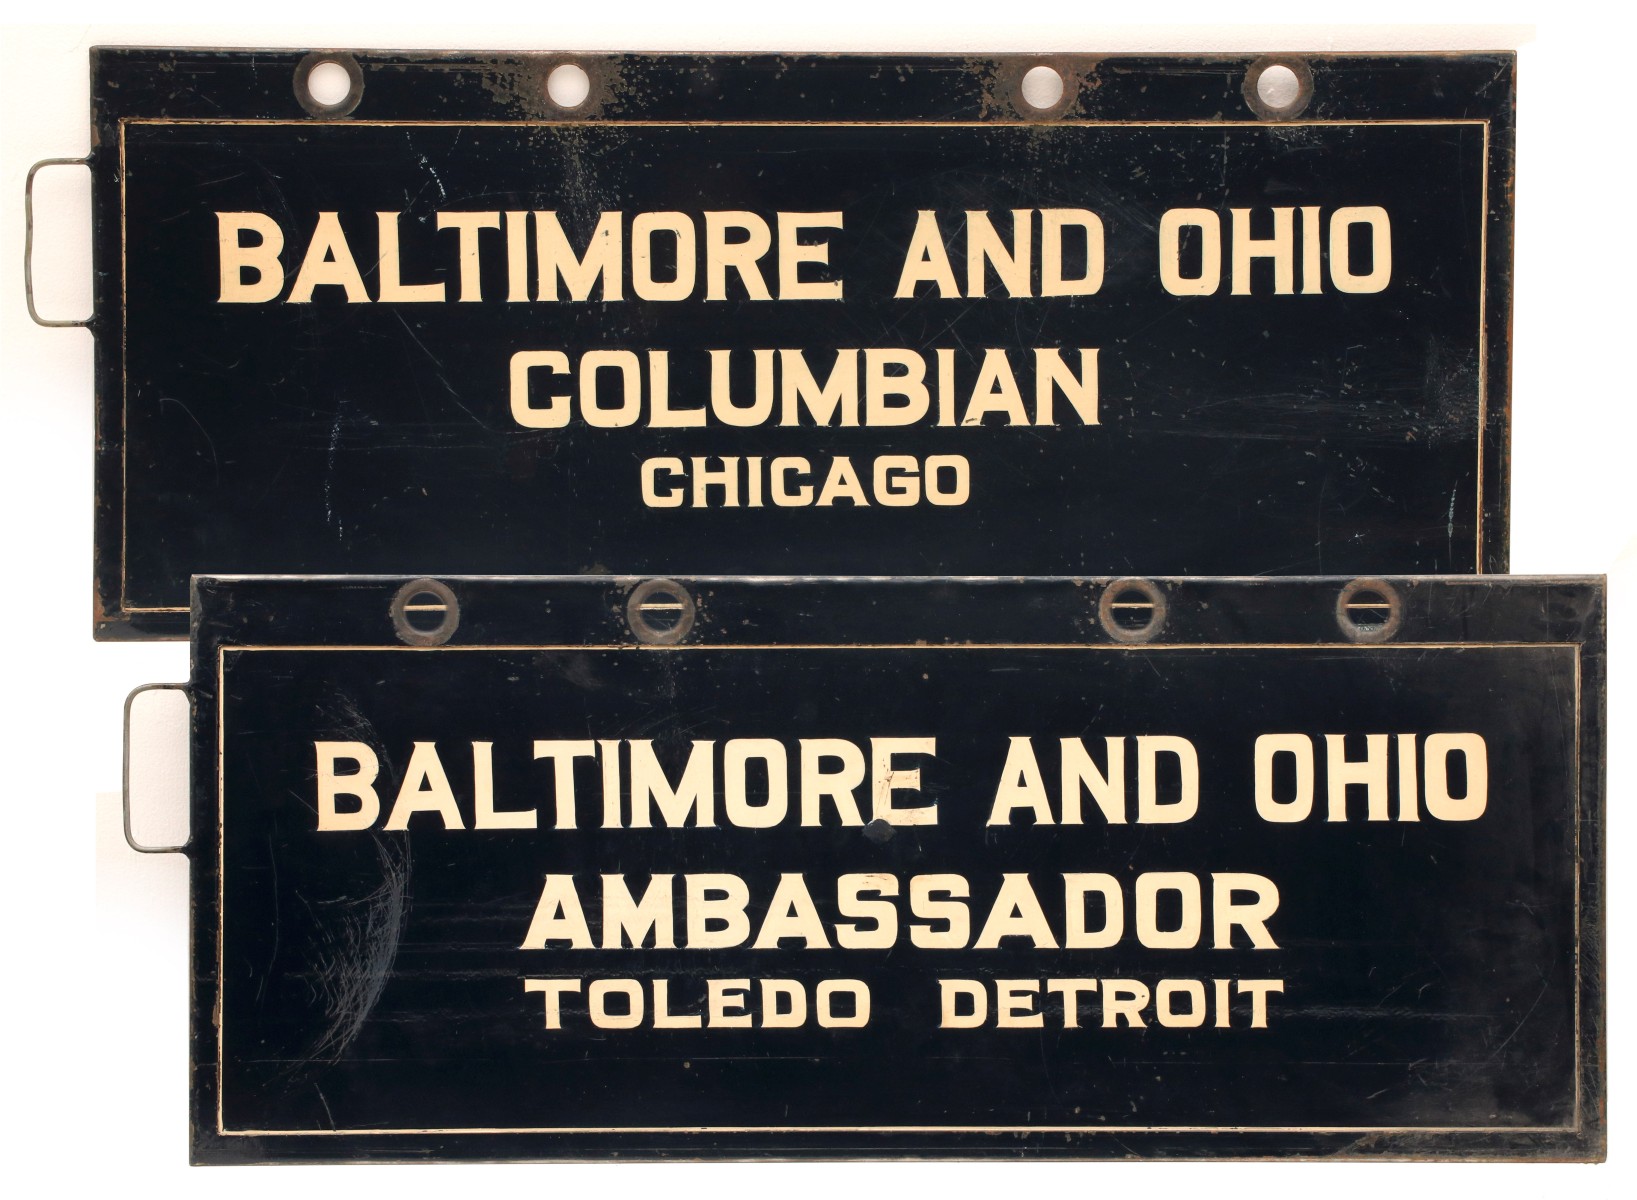 GATE SIGNS FOR THE B&O'S COLUMBIAN AND AMBASSADOR